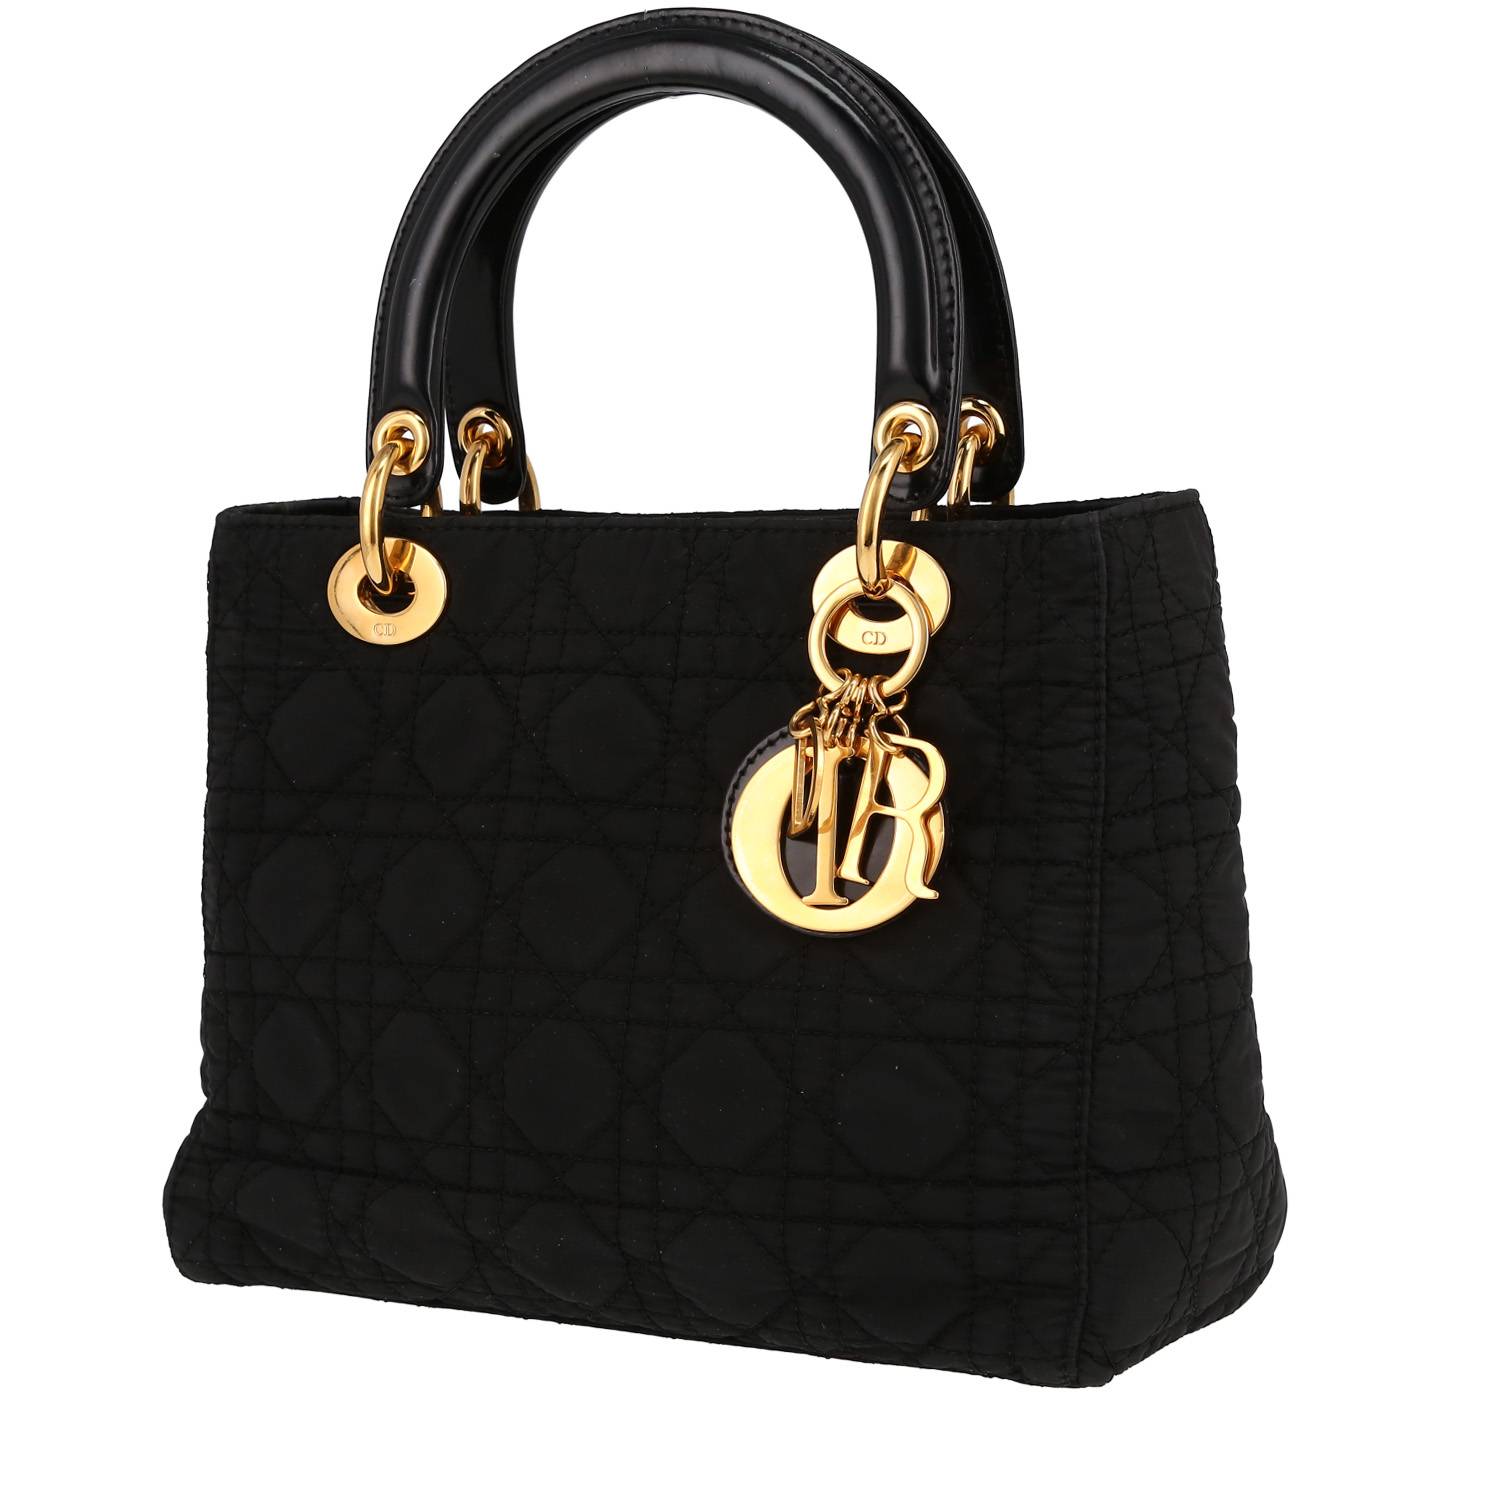 Lady Dior Handbag In Black Canvas Cannage And Black Patent